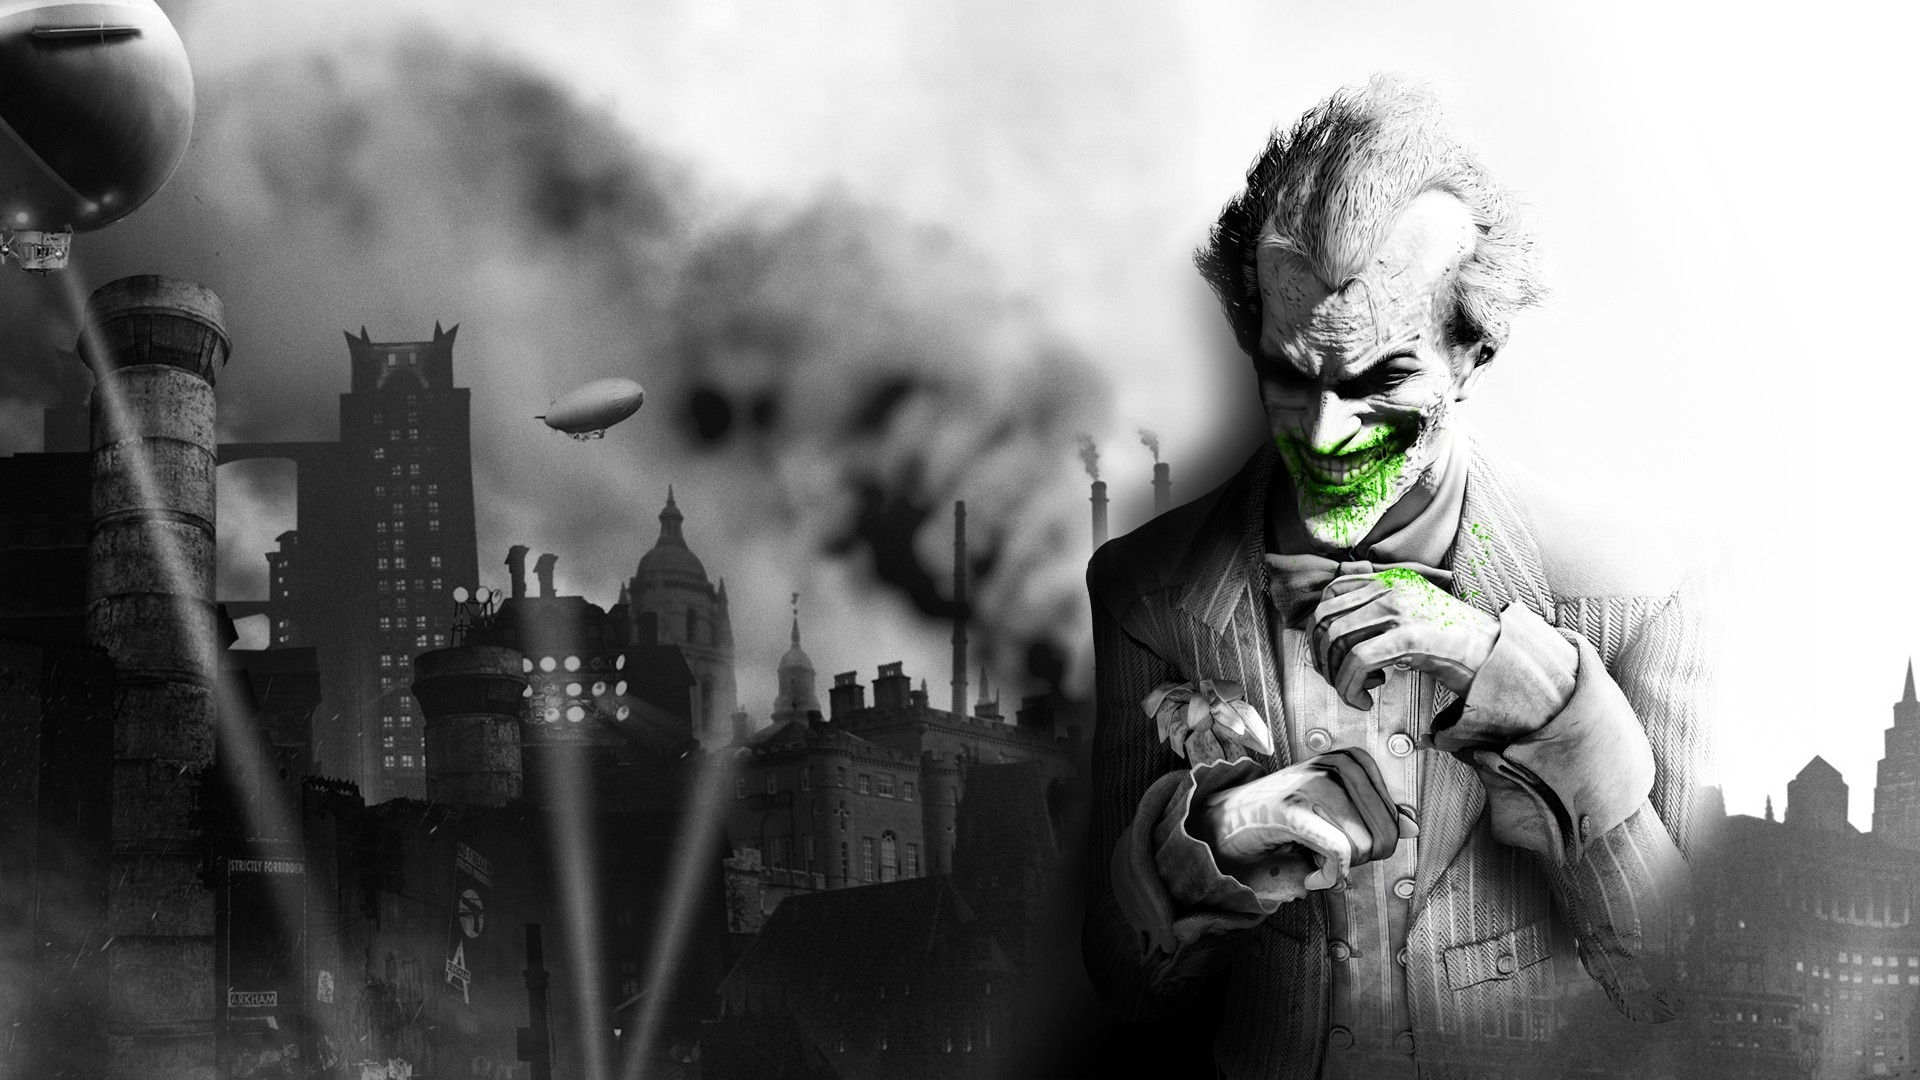 The Joker  Wallpapers  Pictures Images